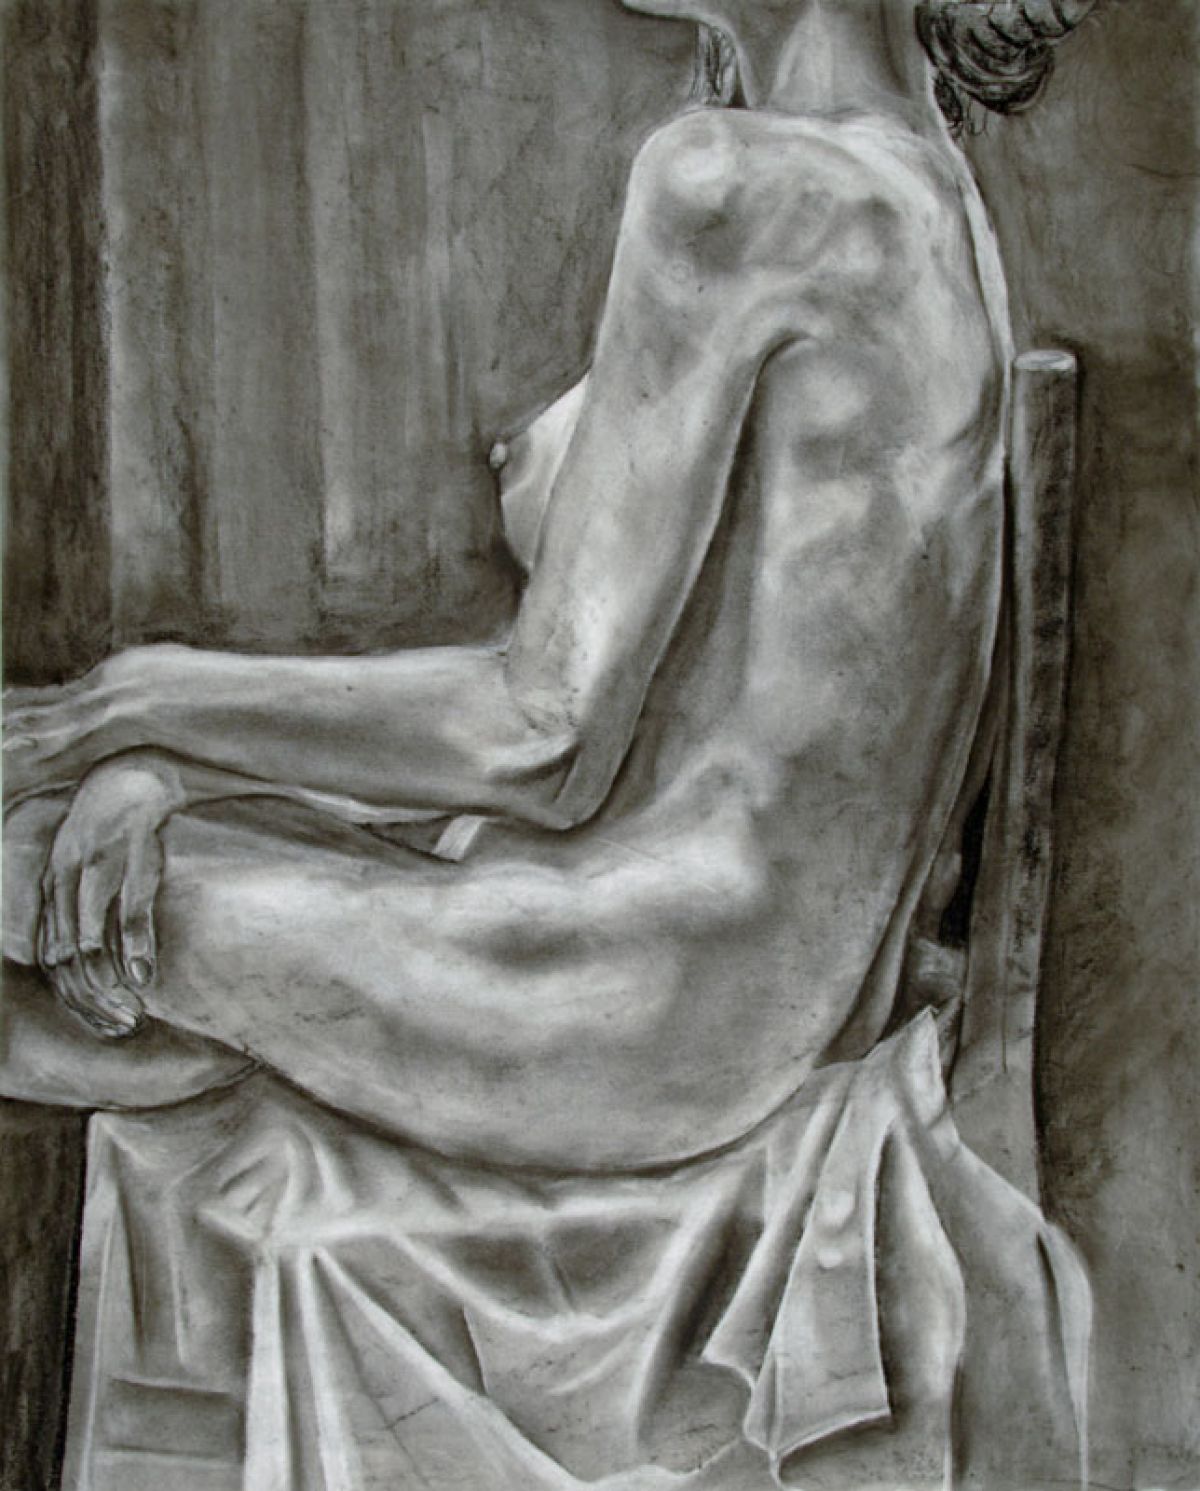 2007, Charcoal on Paper, 36 x 29 in.